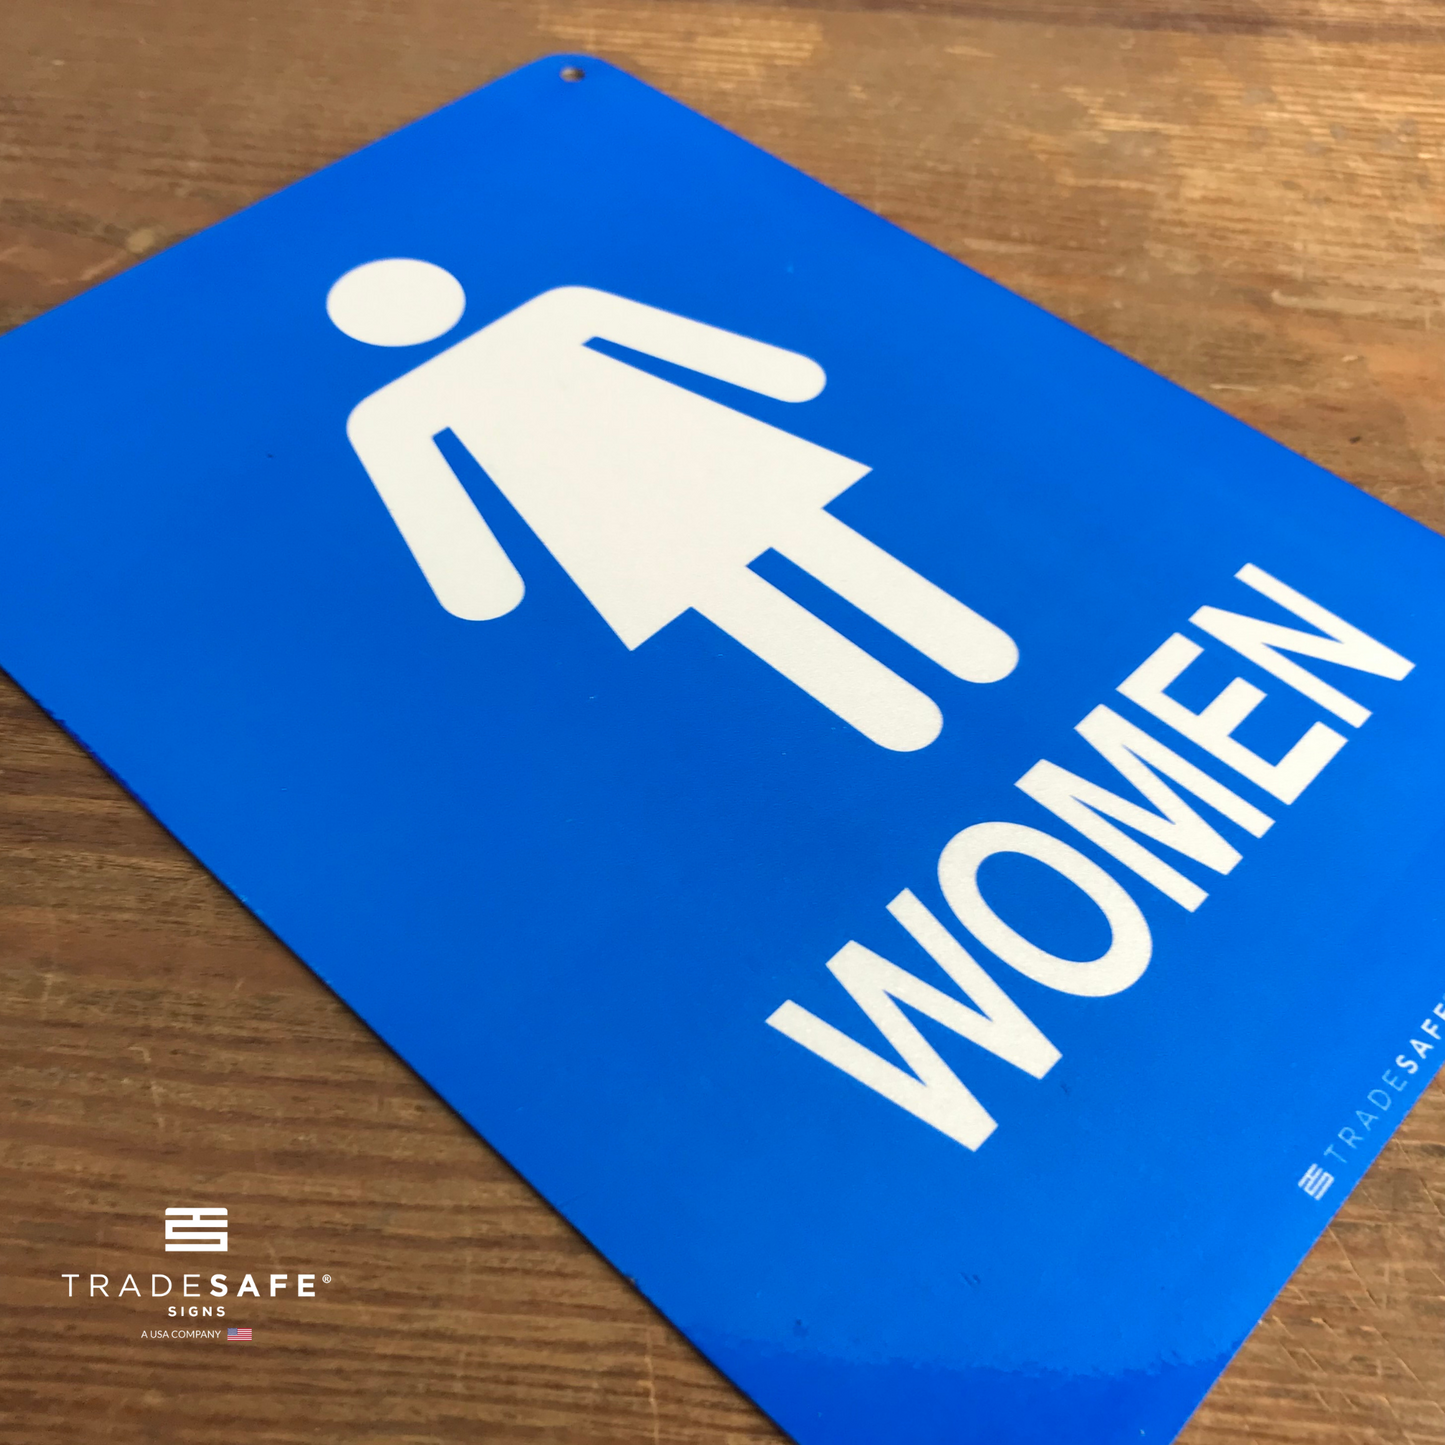 vibrant and highly visible women's restroom sign